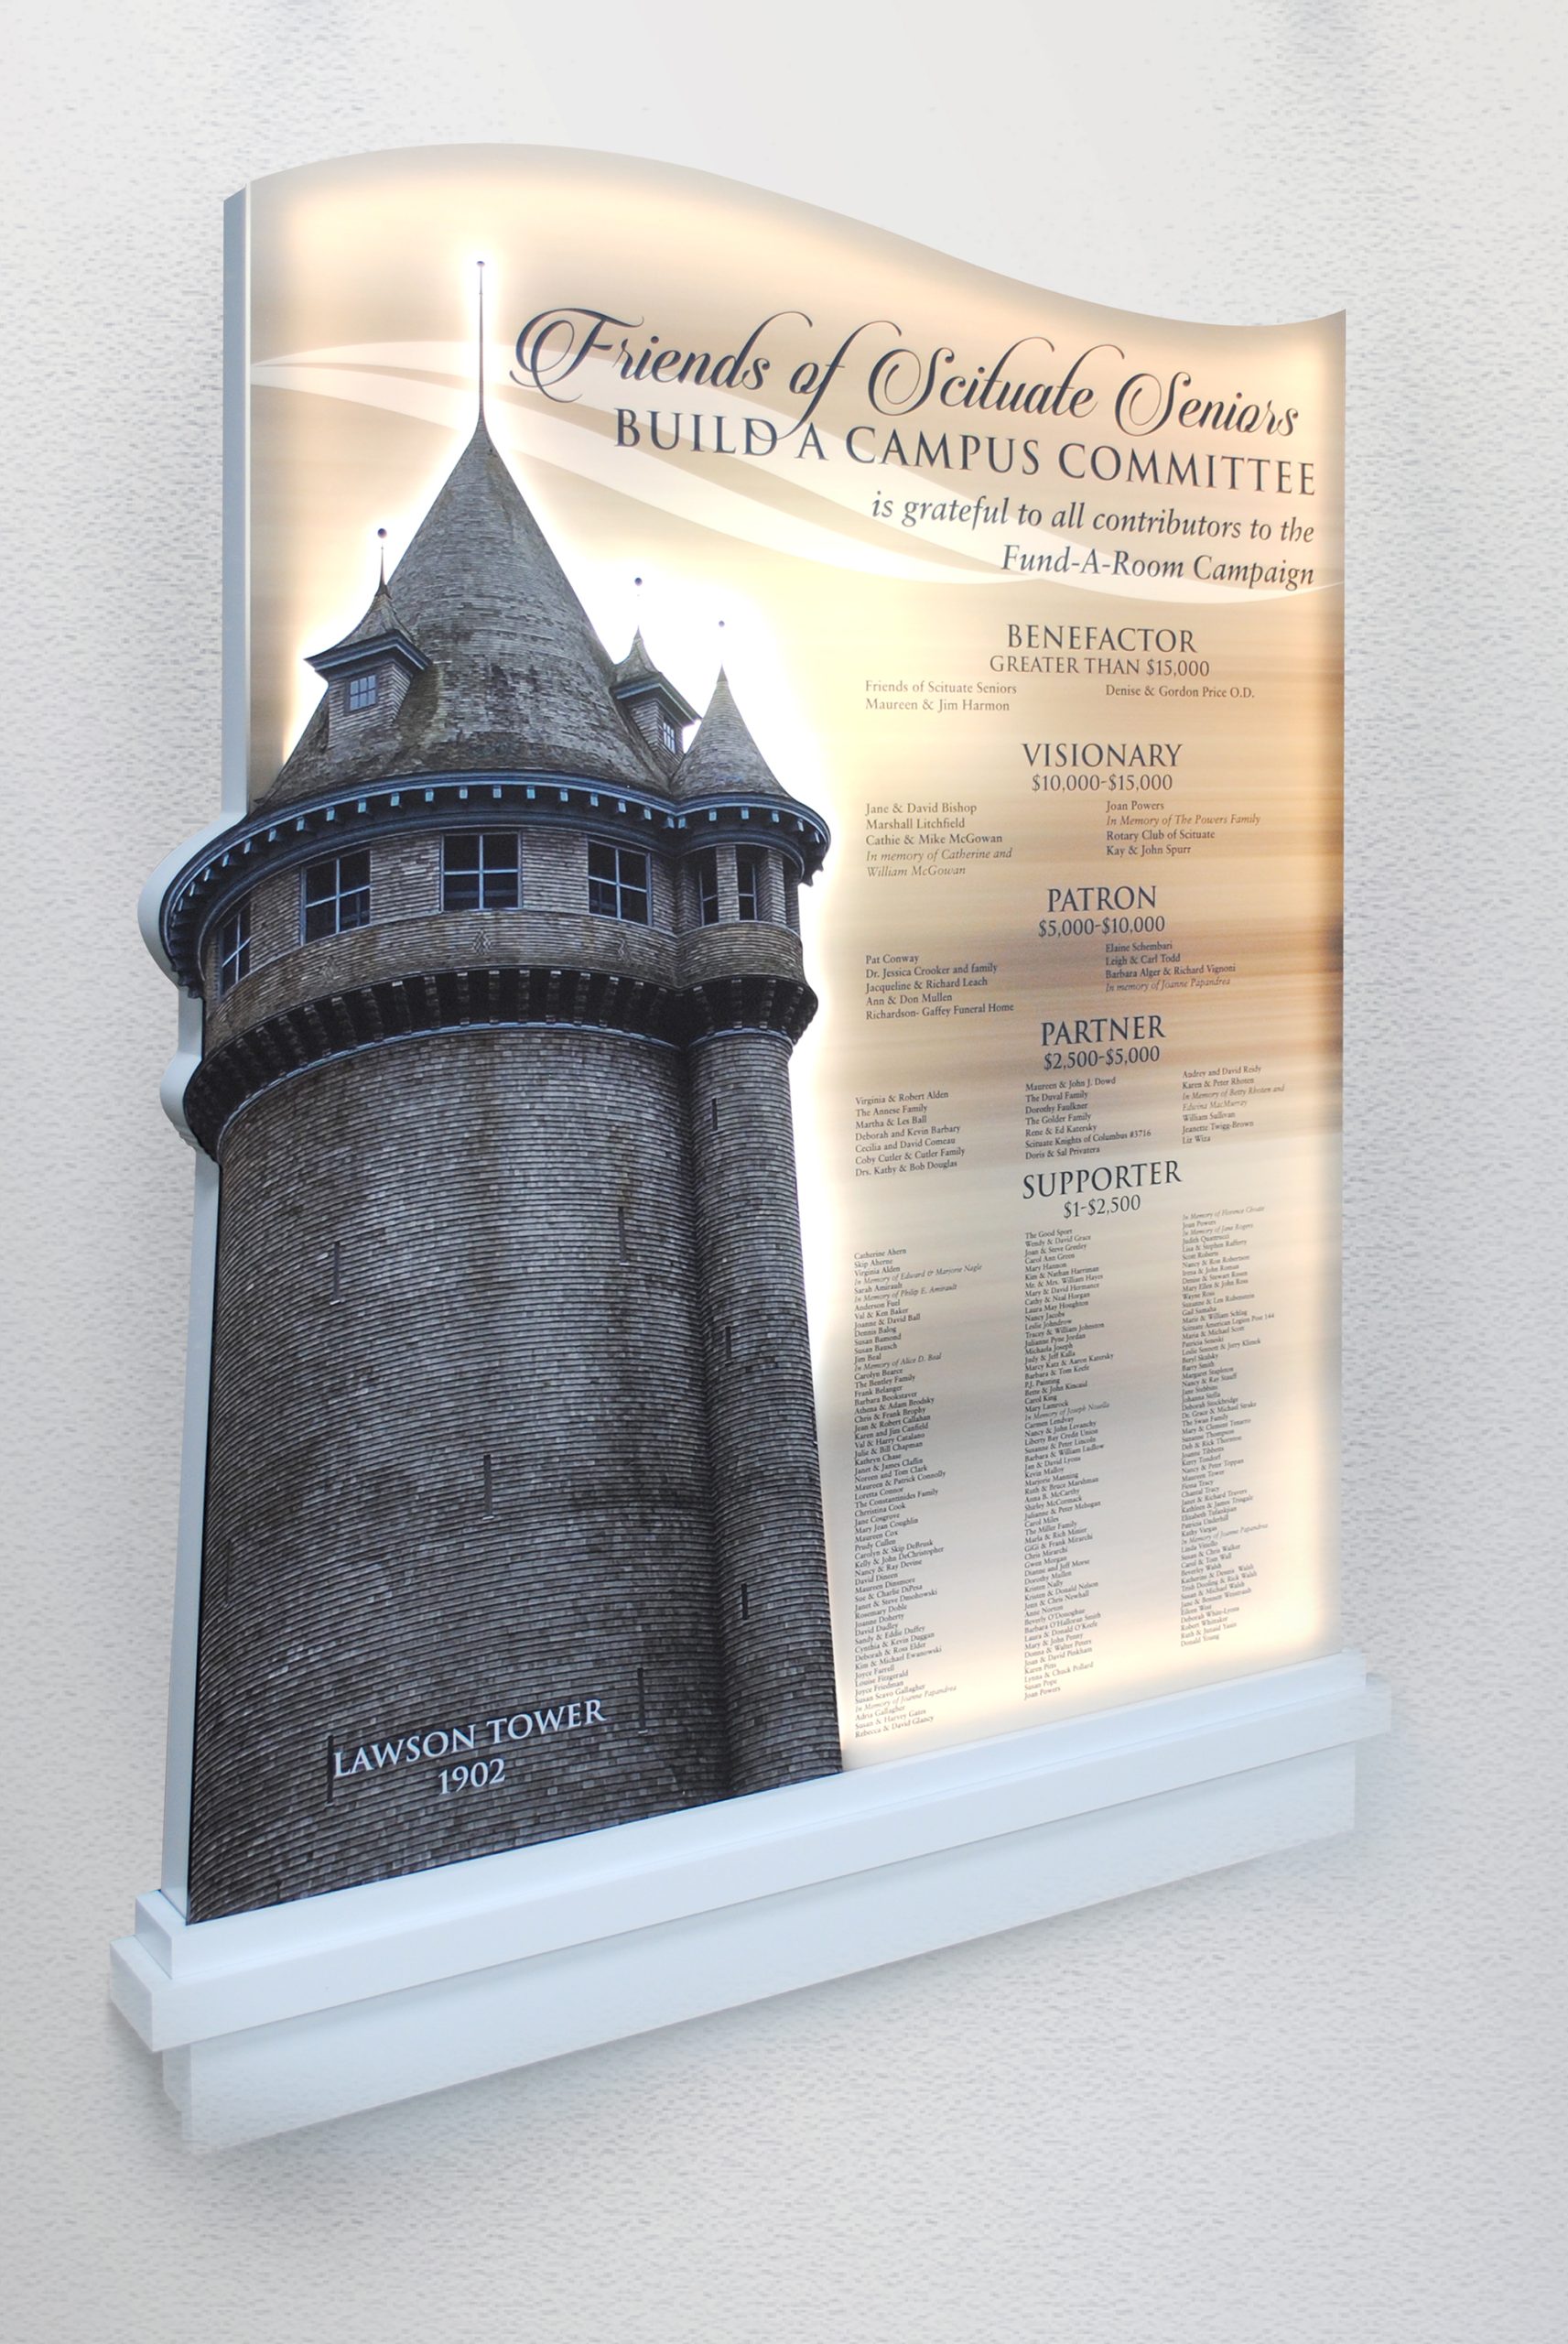 Lighted Display, Capital Campaign, Permanent Display, Large Printed Graphics, Backlit Display, Donor Recognition Display, Historical Display